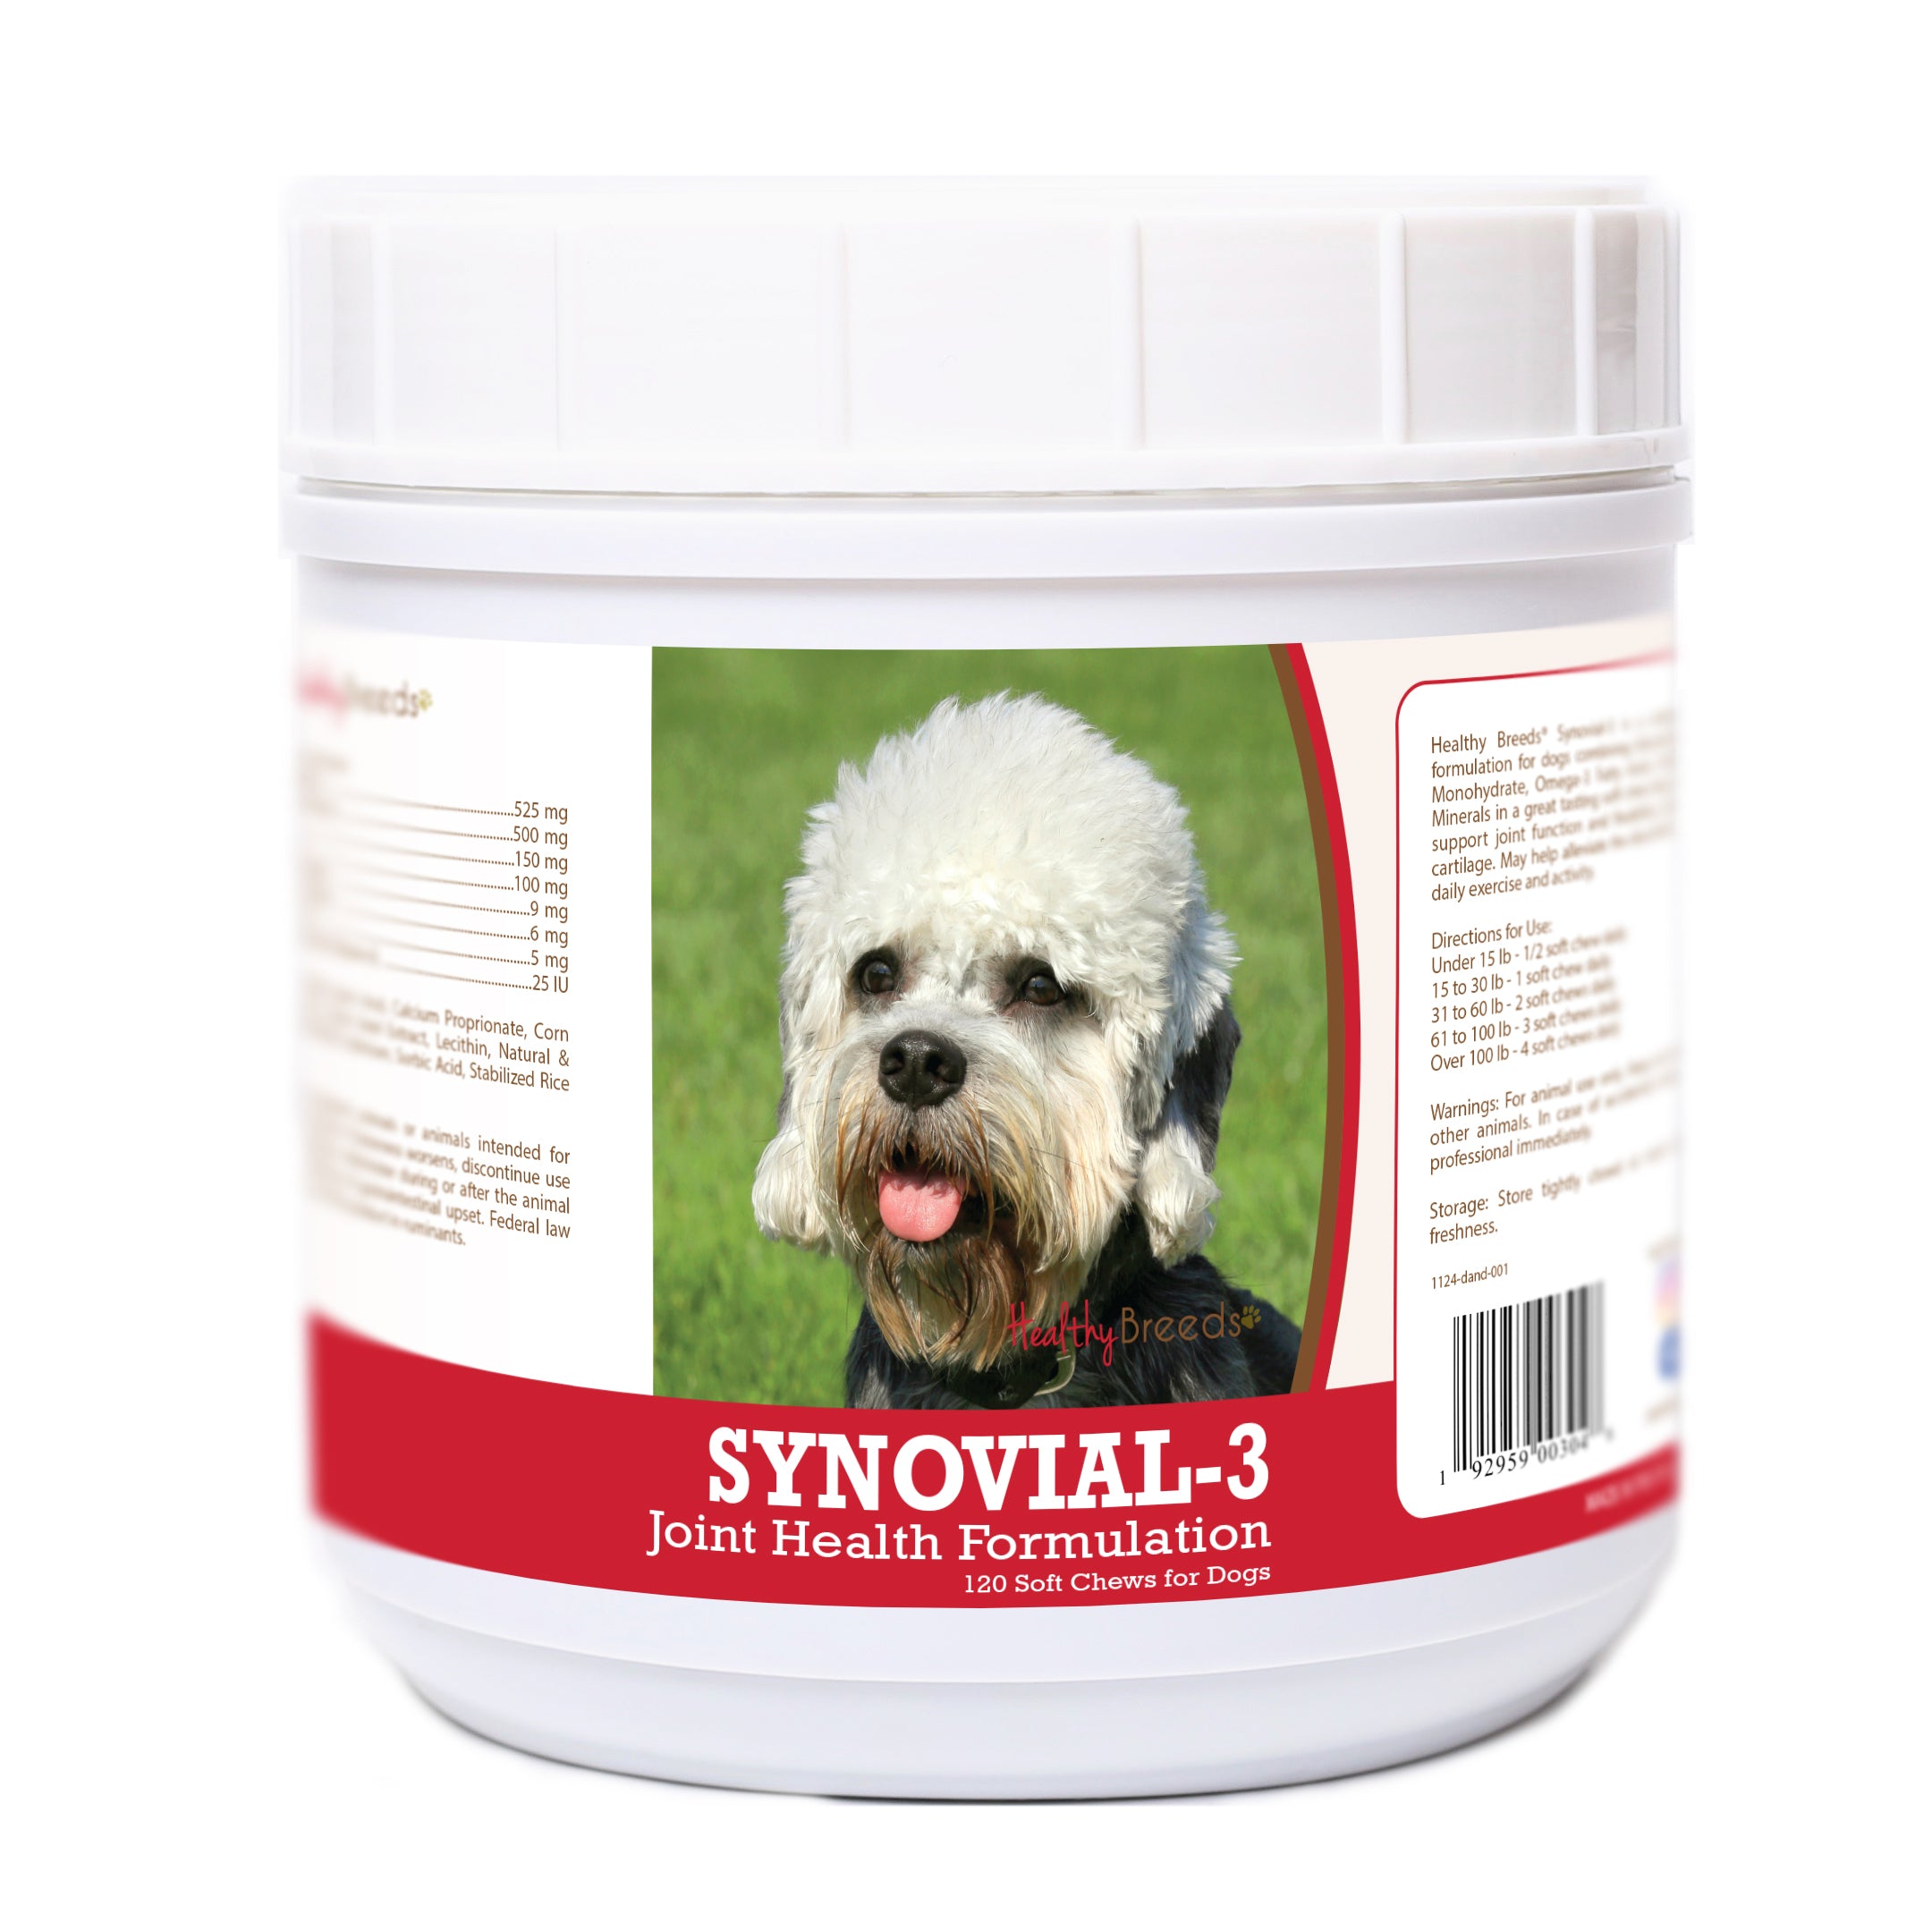 Dandie Dinmont Terrier Synovial-3 Joint Health Formulation Soft Chews 120 Count